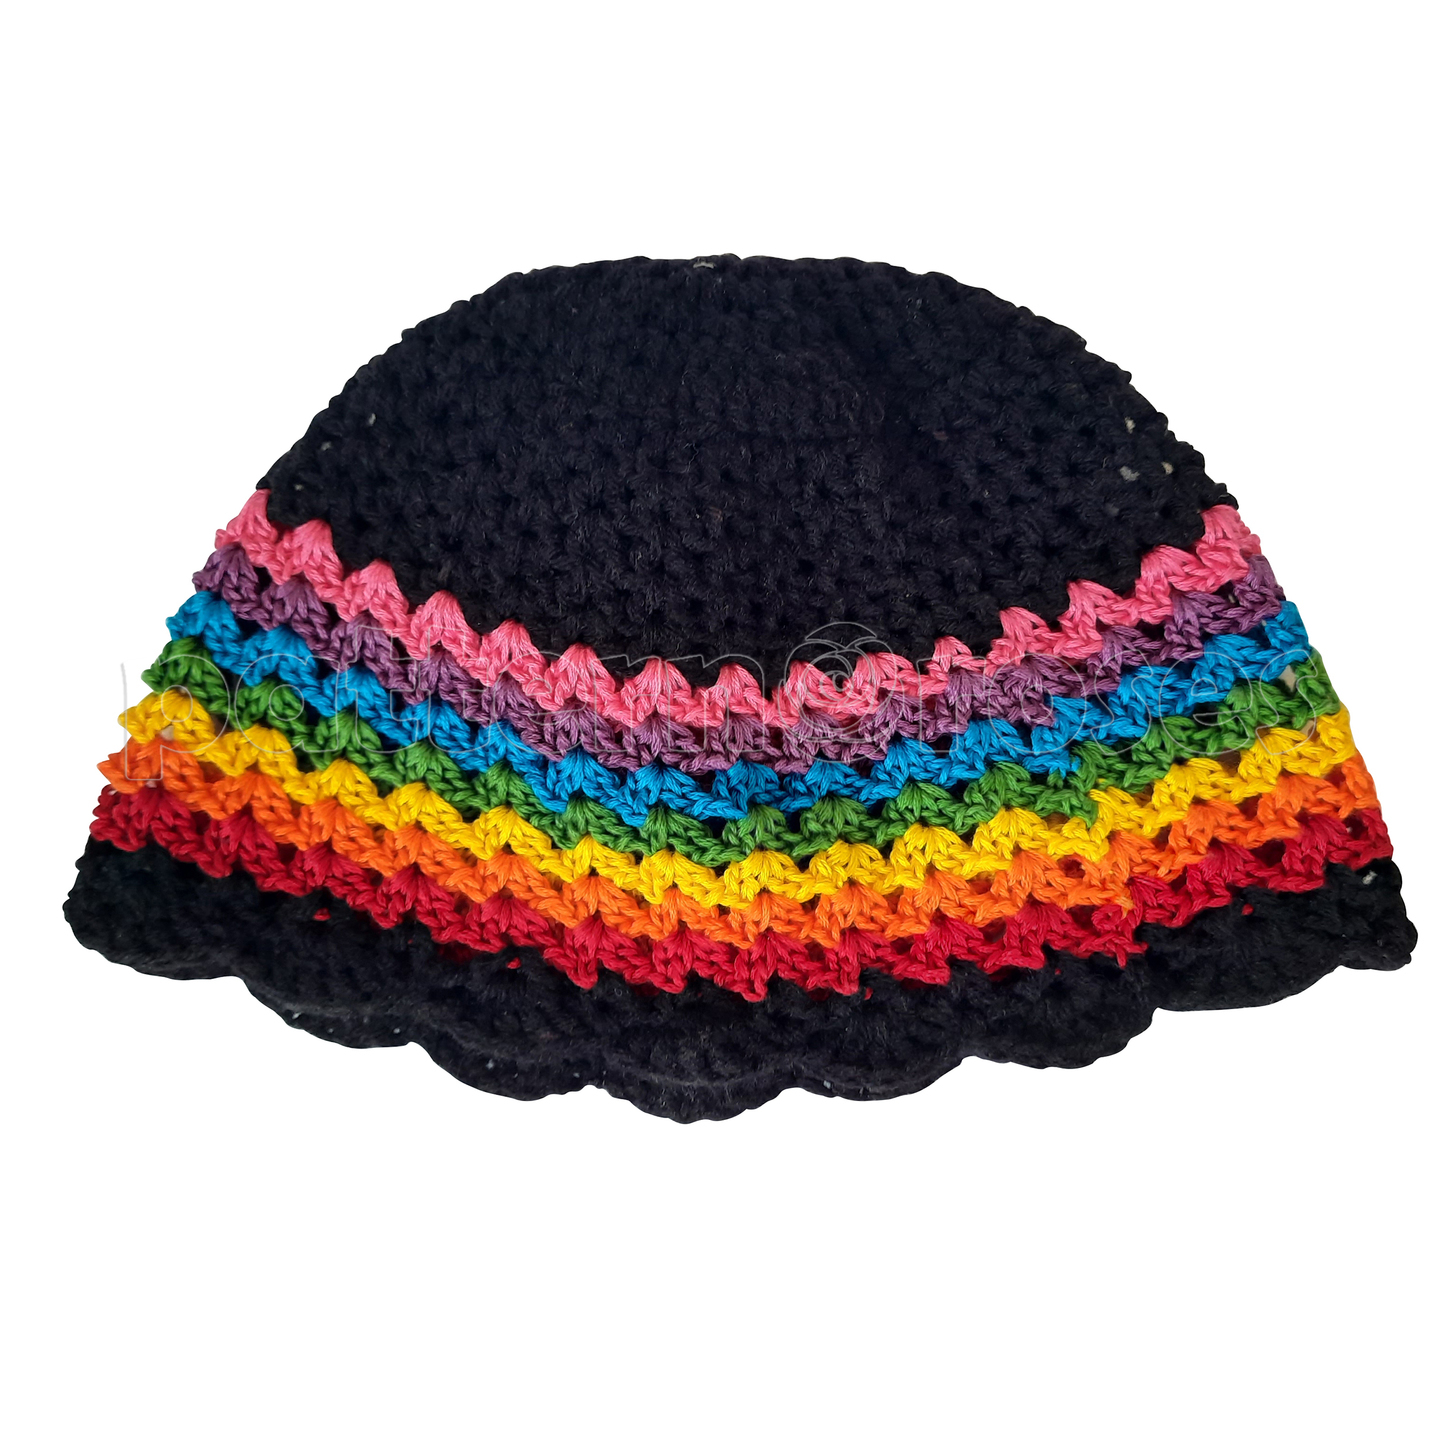 Crochet Cap for Toddlers